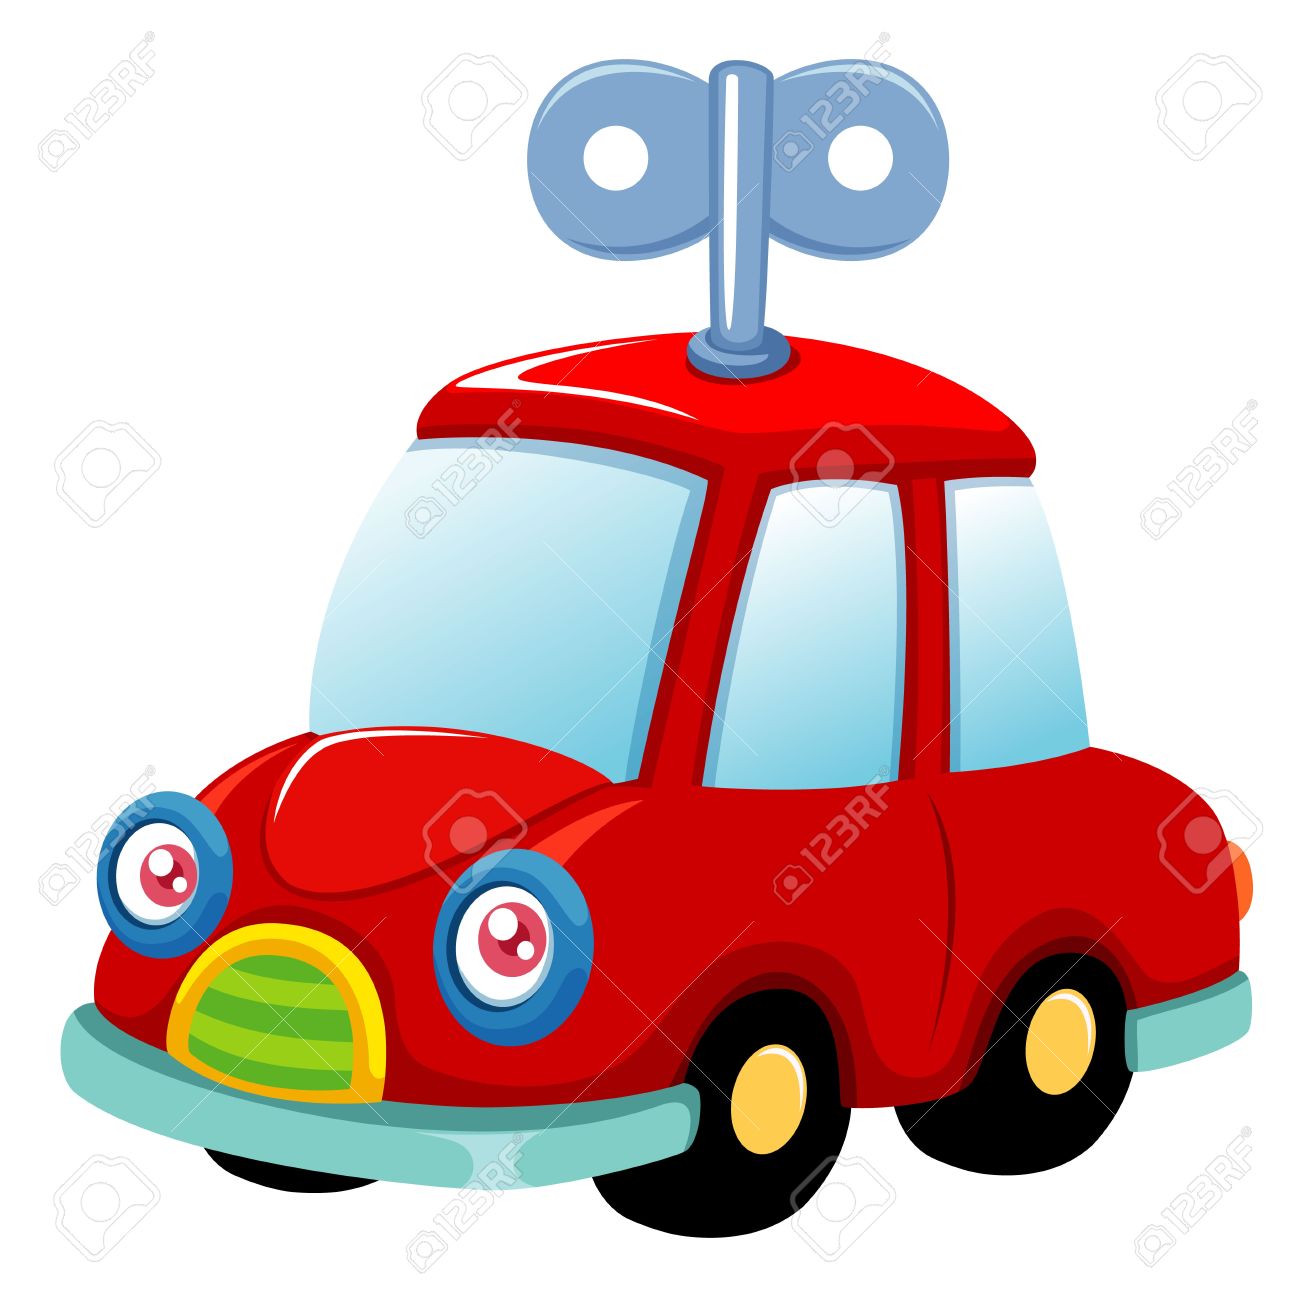 Car toy clipart